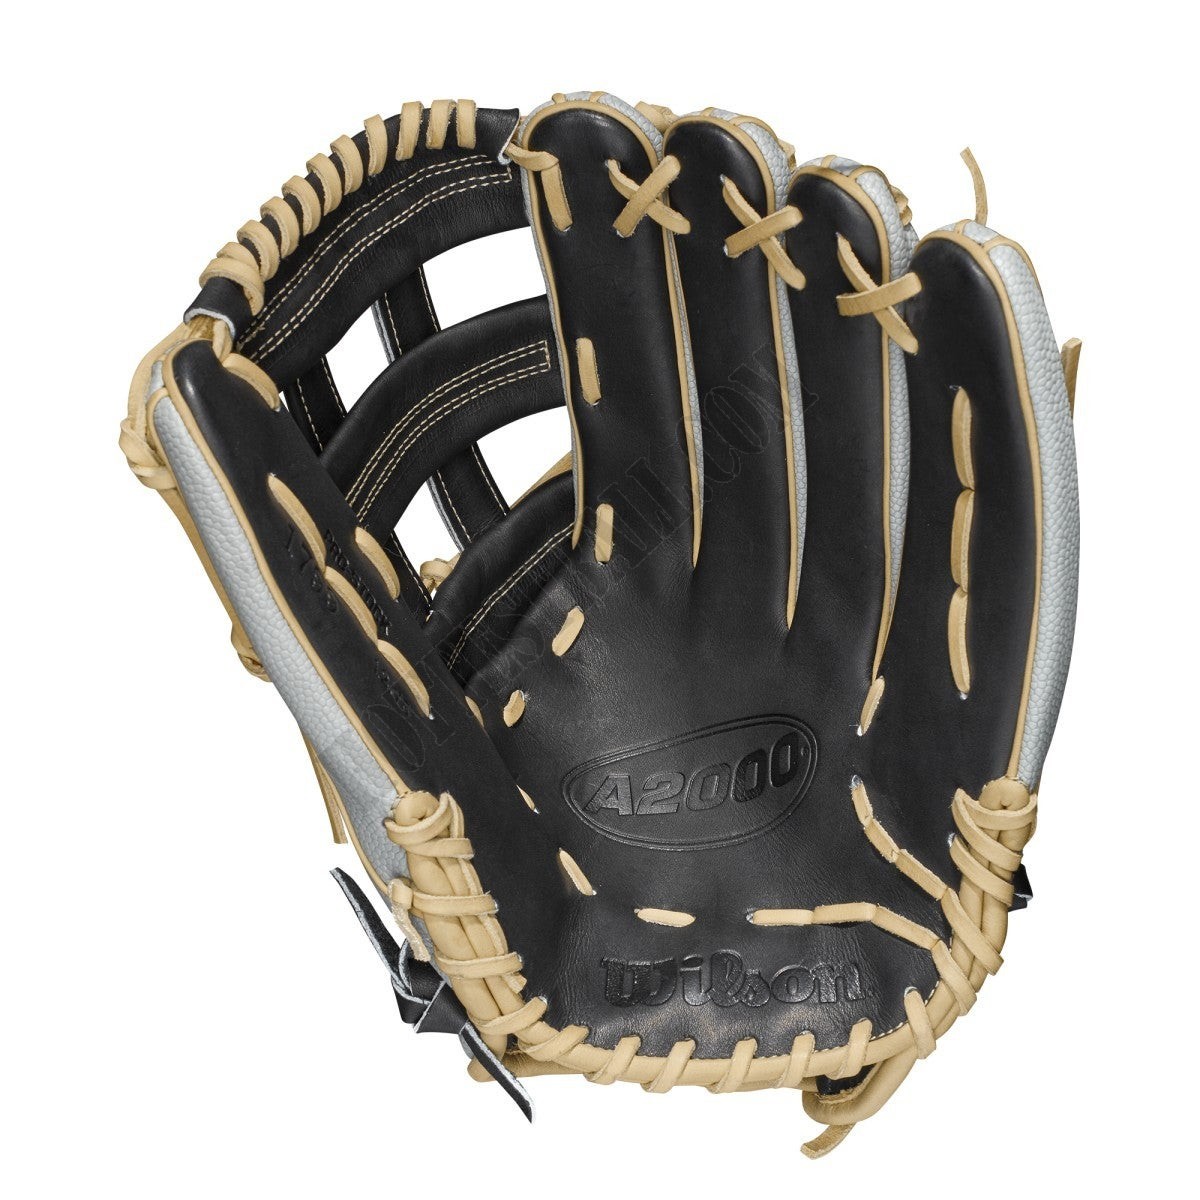 2021 A2000 1799SS 12.75" Outfield Baseball Glove ● Wilson Promotions - -2